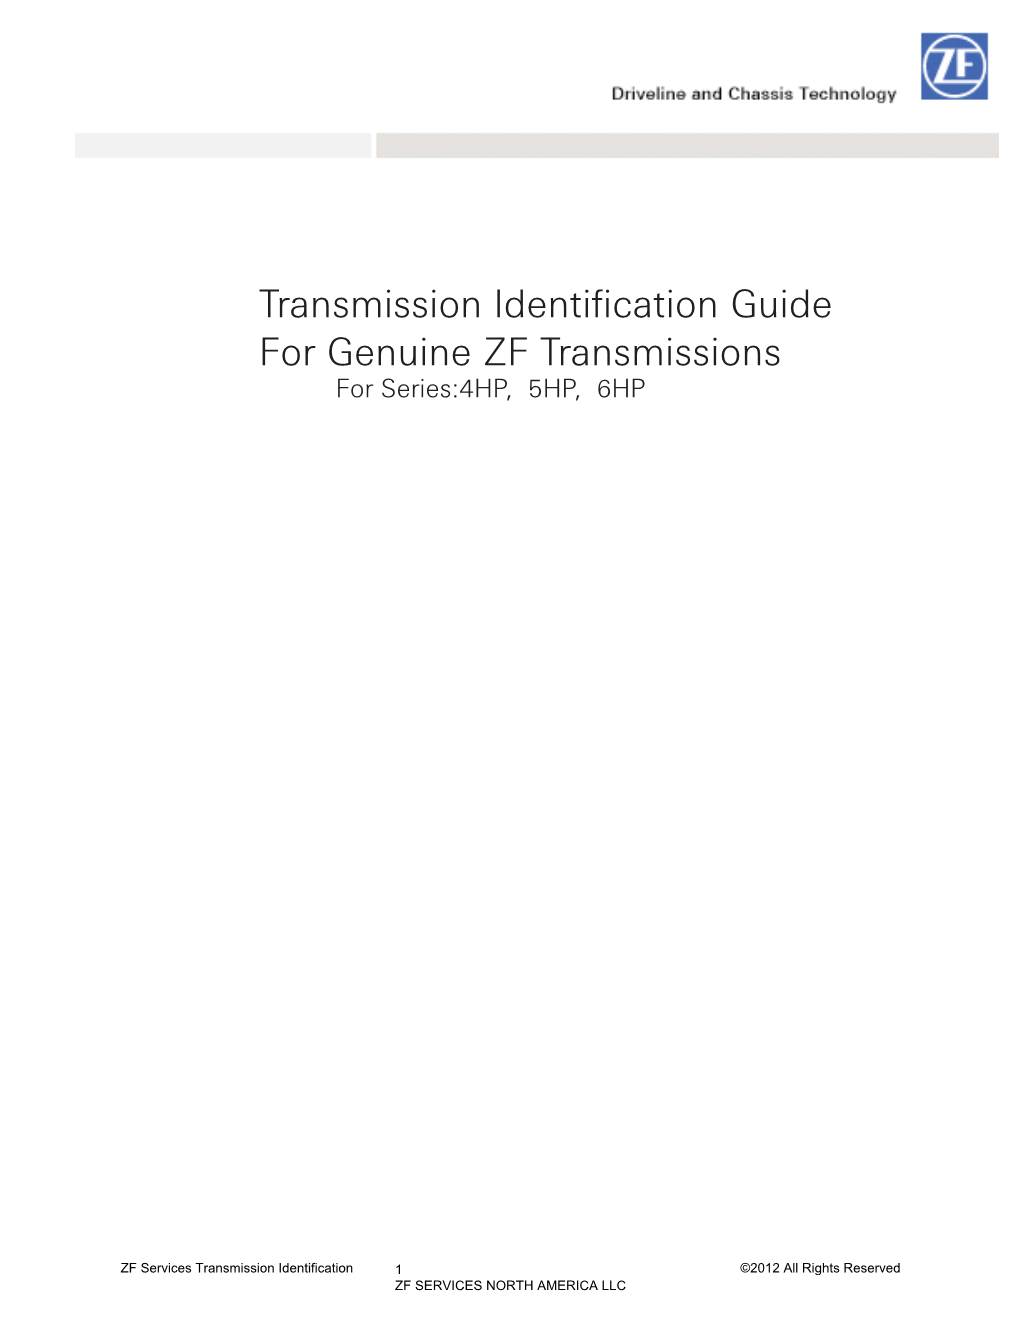 5HP19FLA Transmission Identification Guide for Genuine ZF Transmissions